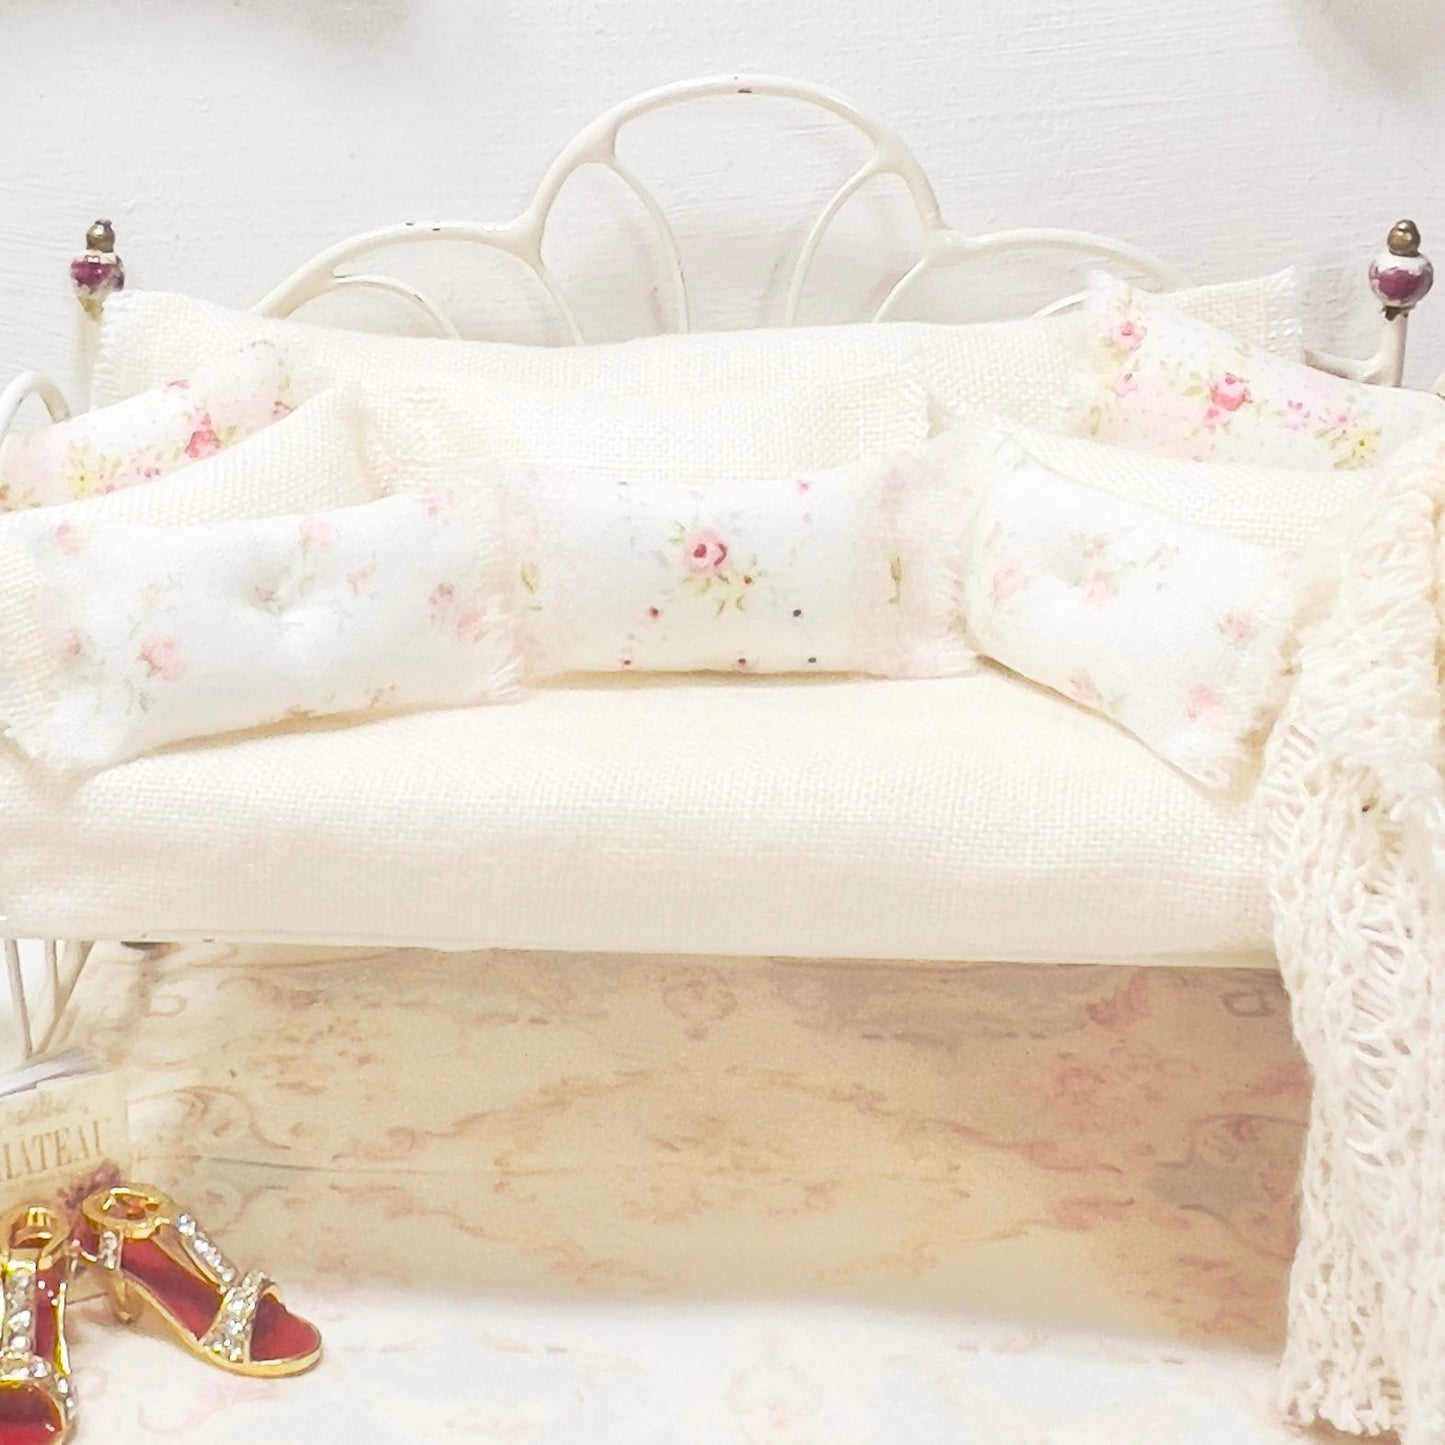 Chantallena Doll House Day Bed | Tea Dyed Linen wuth Petite Pink Roses 1:12 Scale Dollhouse Set | Floral Vintage Cream2